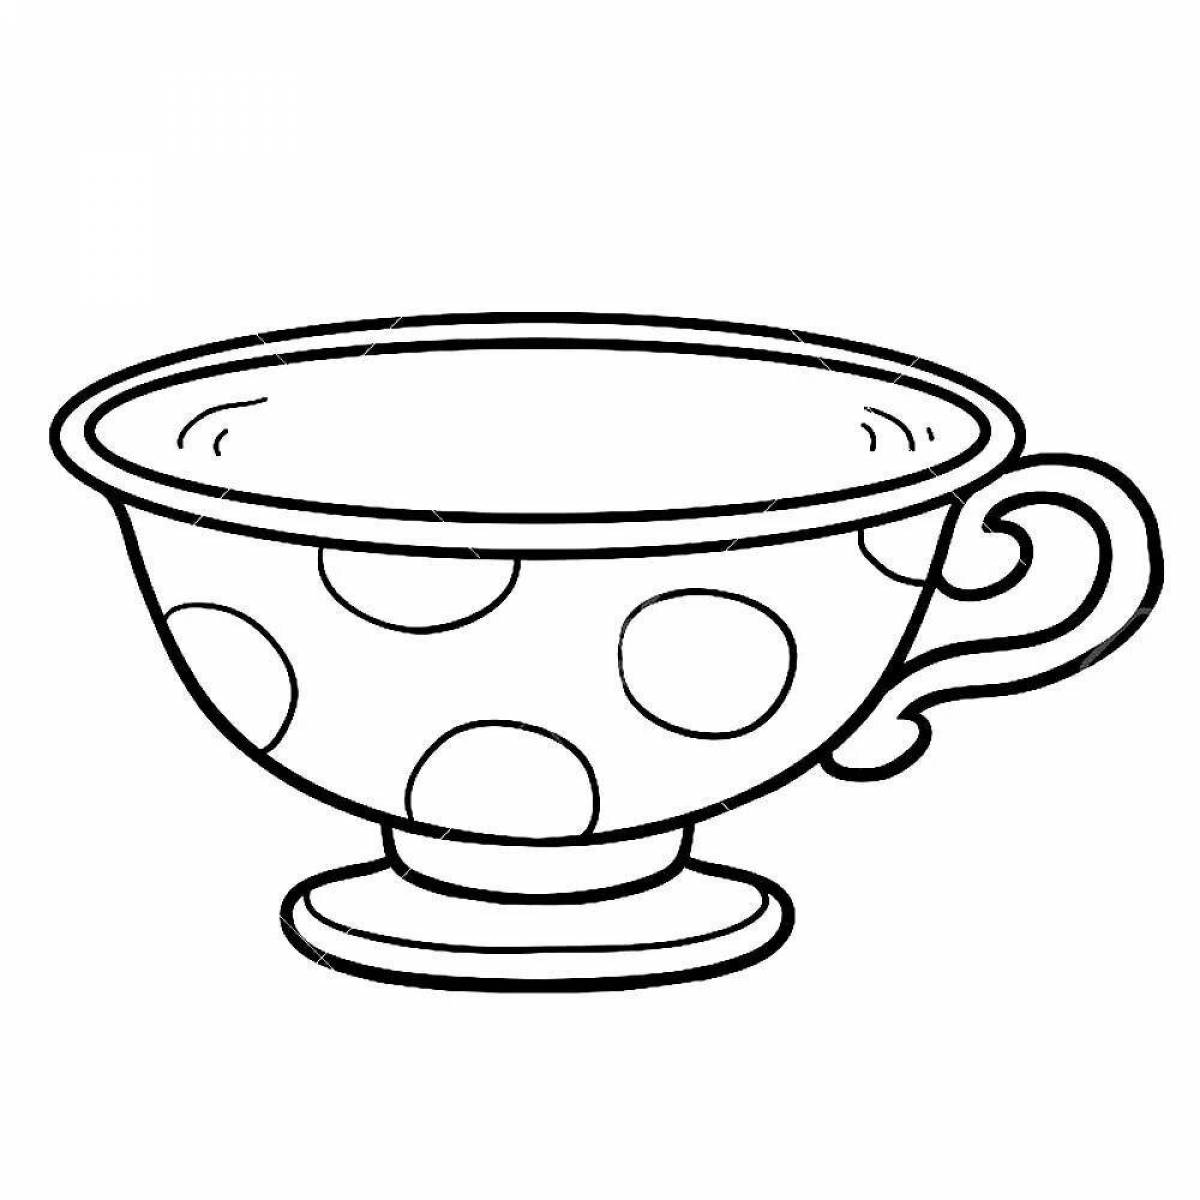 Coloring book shimmering cup for kids